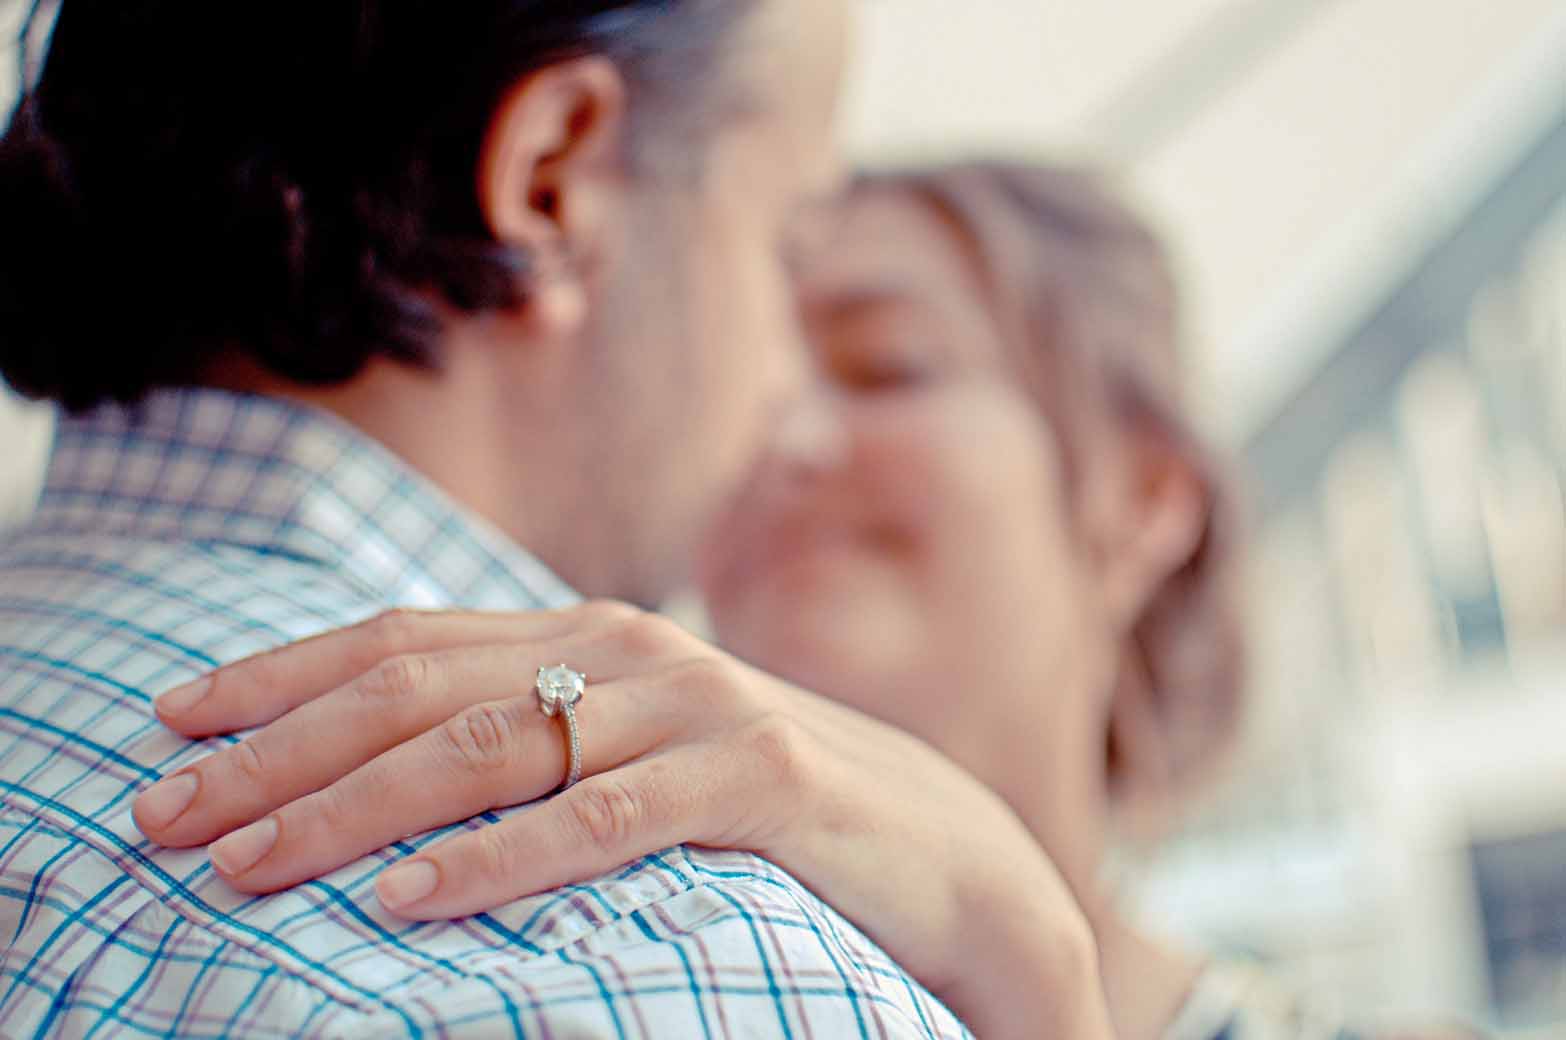 Remarriage—5 Tips for How to Make it Work